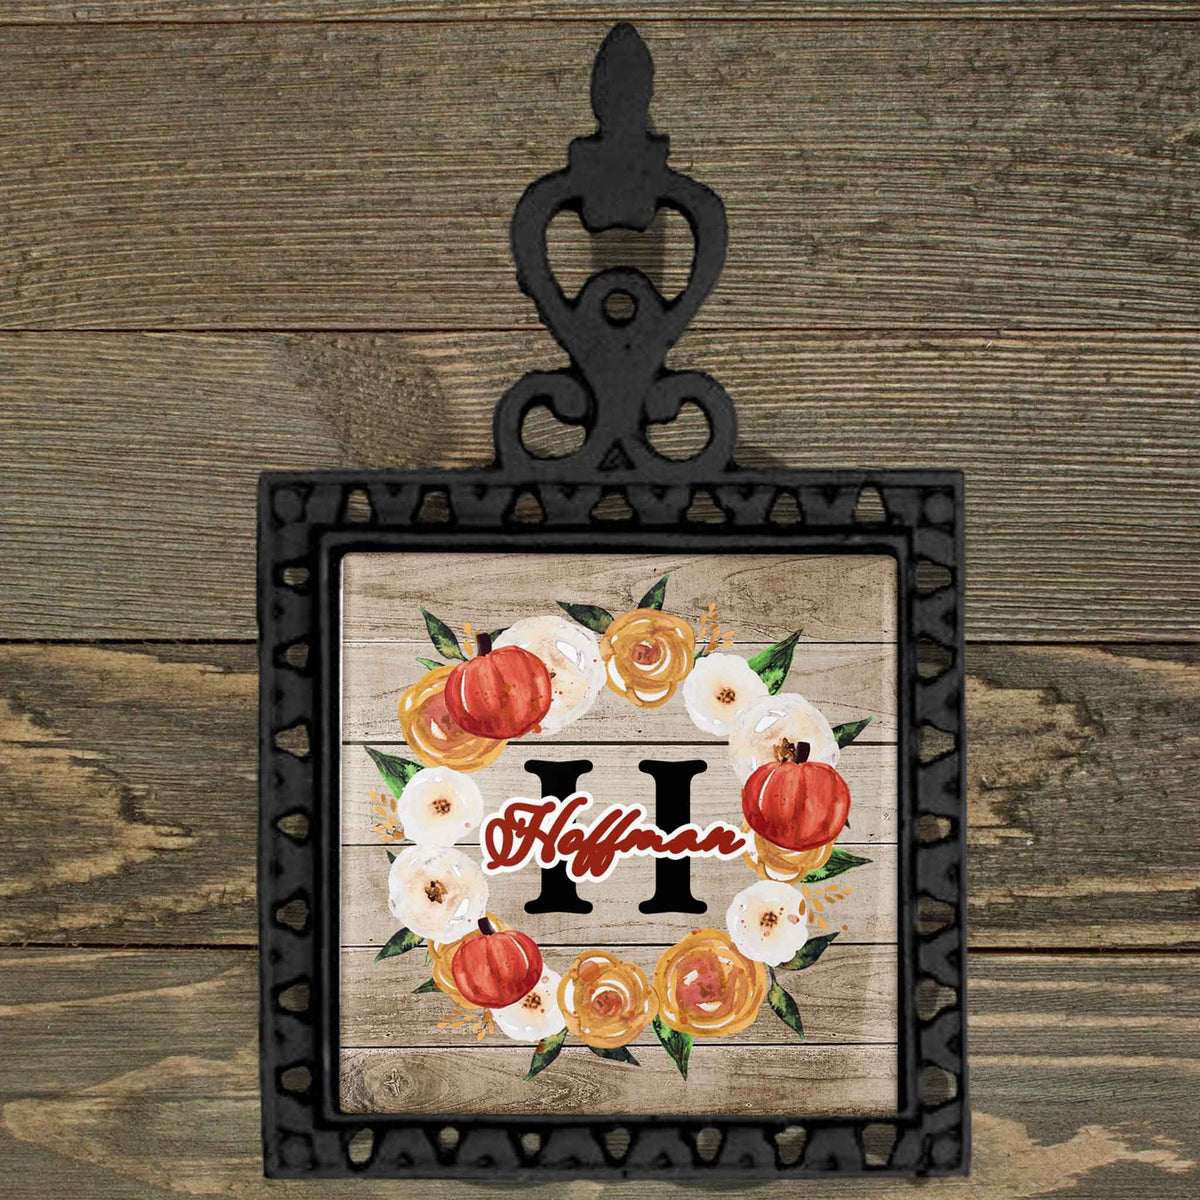 Personalized Iron Trivet | Custom Kitchen Gifts | Fall Watercolor Wreath